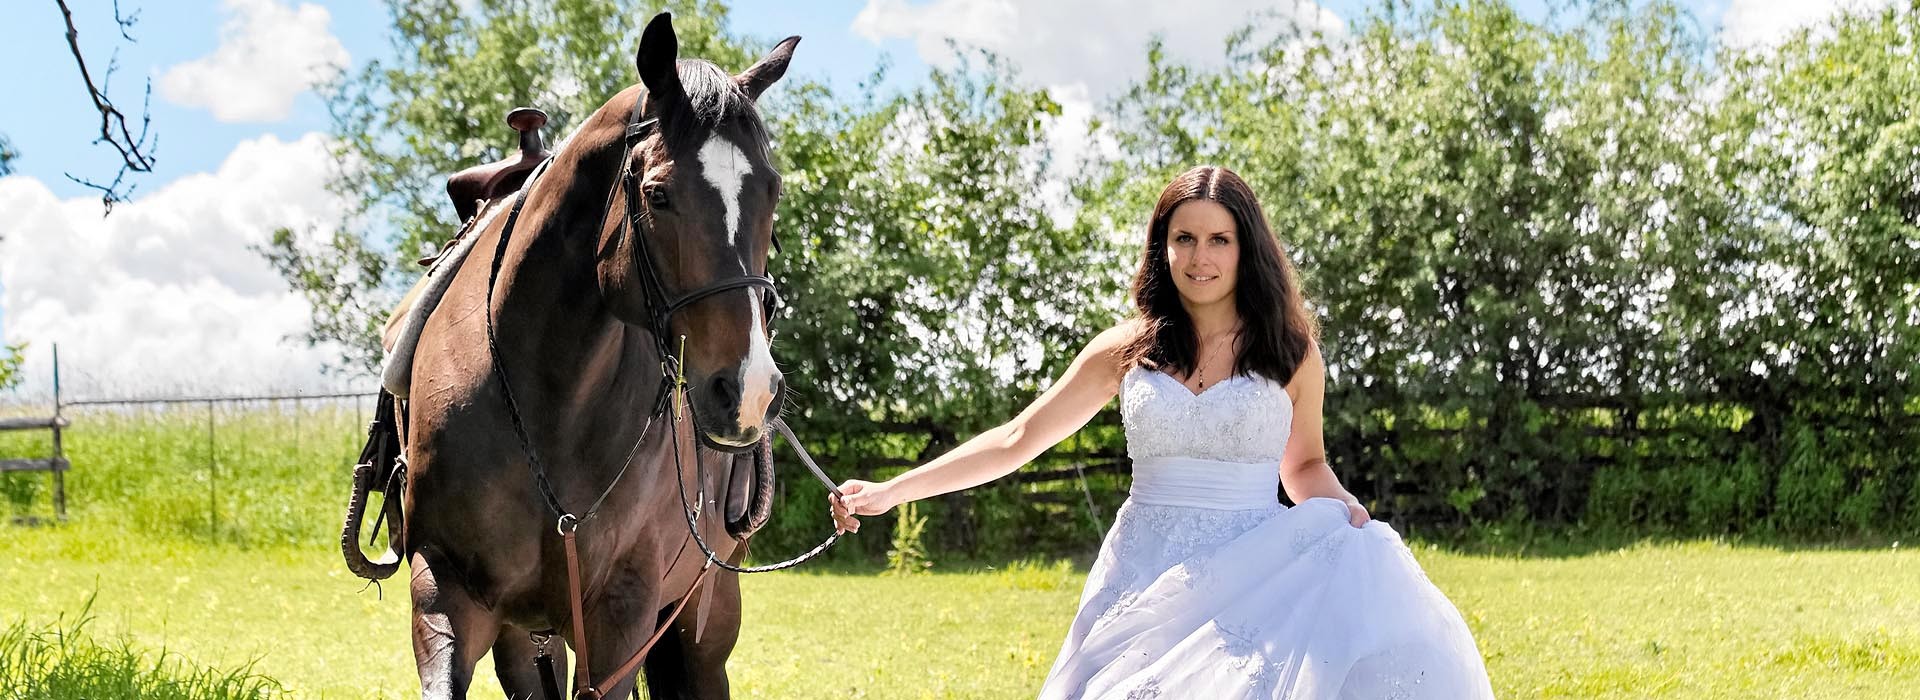 bride walking with horse